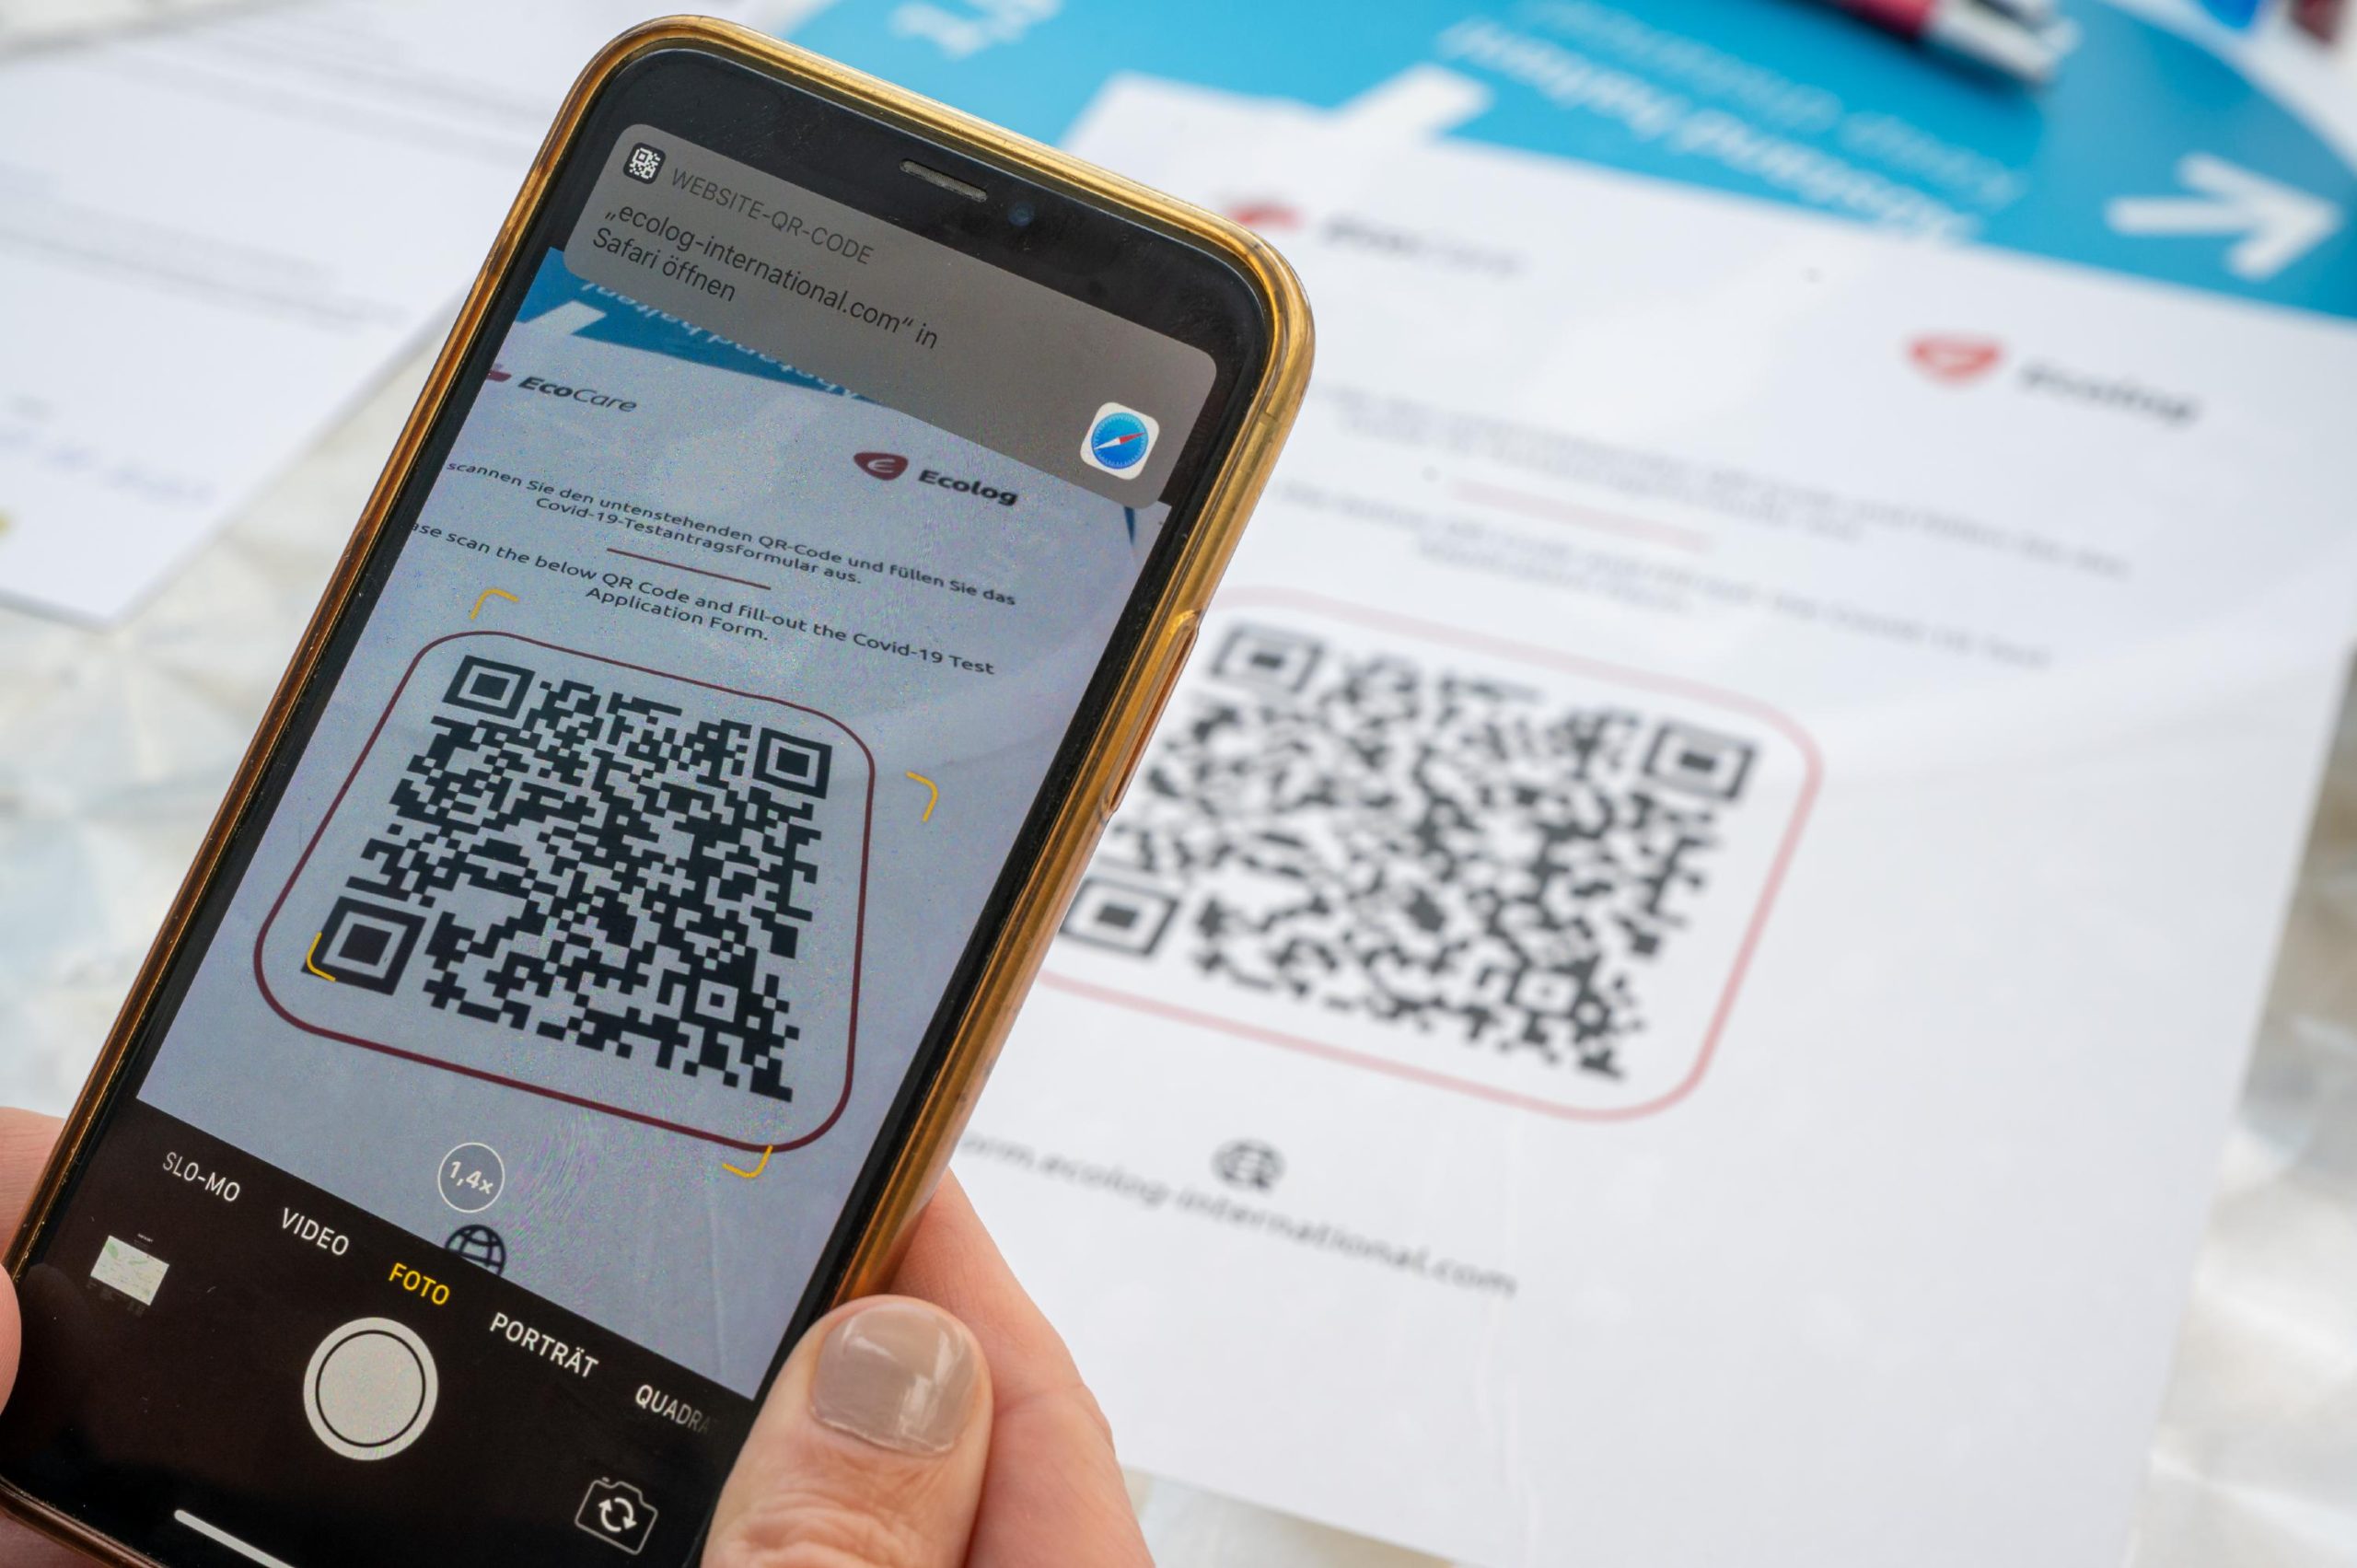 In this way you can obtain the QR code of your Covid-19 test to travel